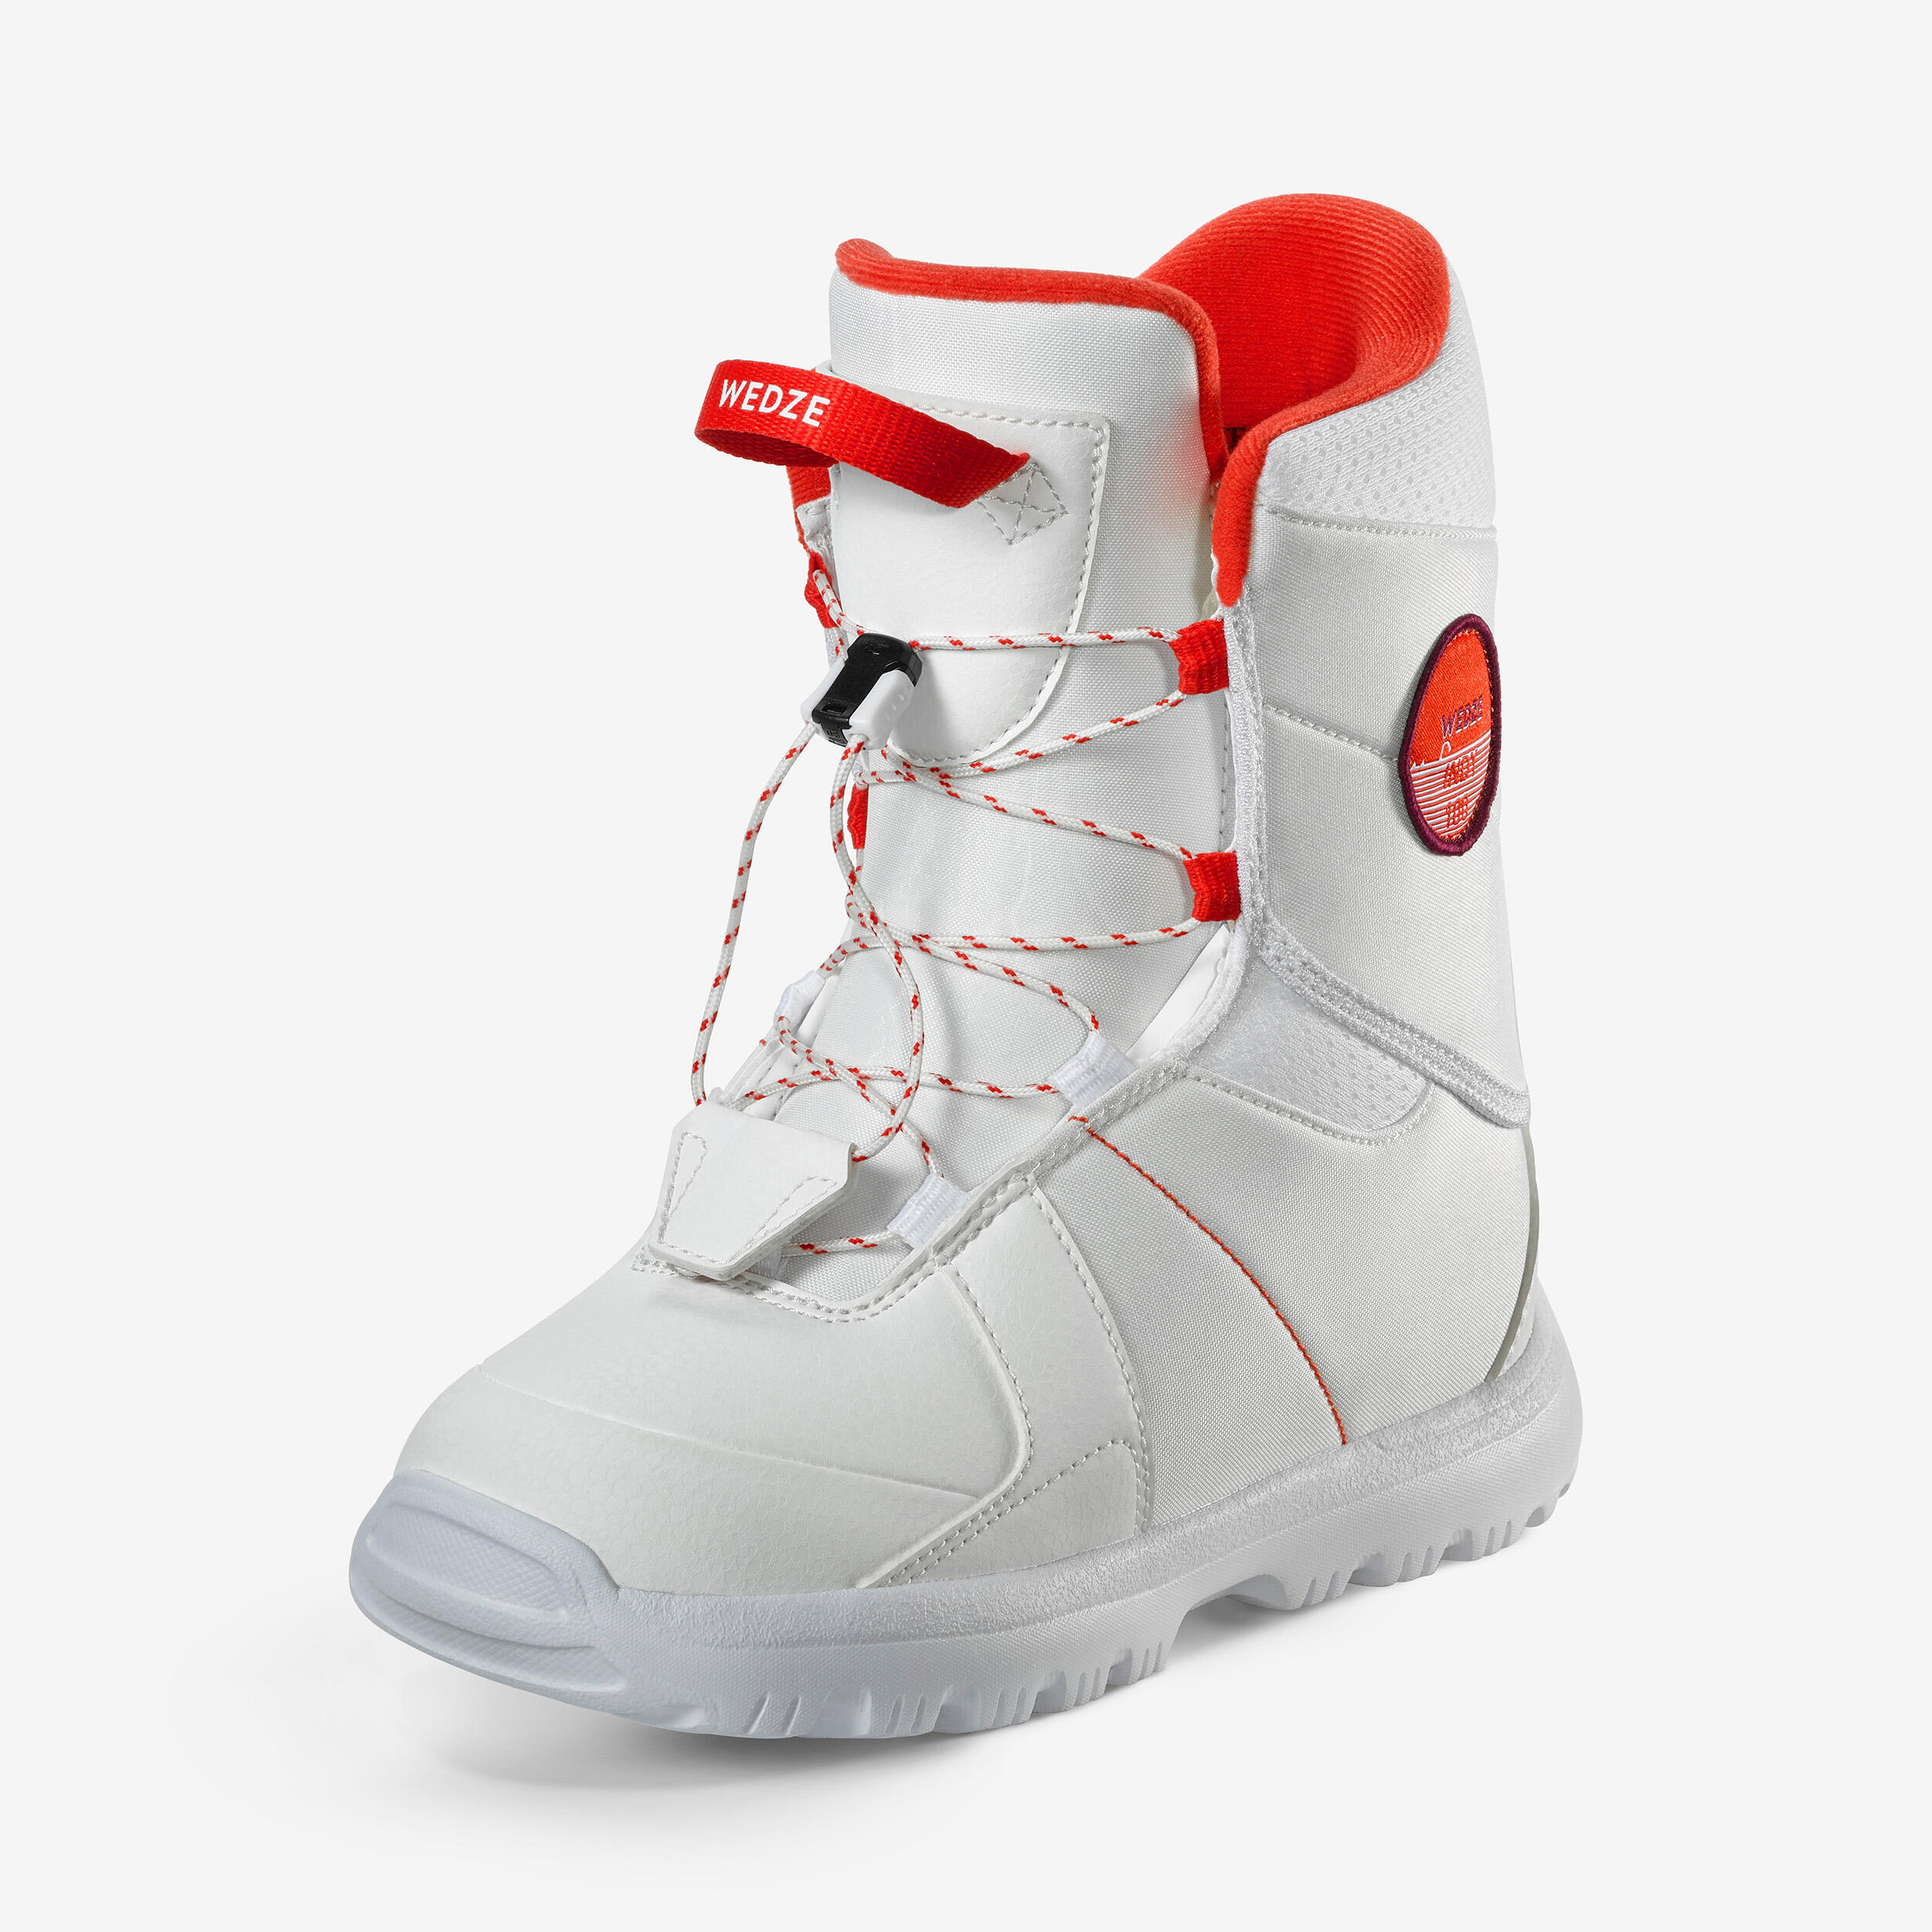 Image of Kids’ Snowboarding Boots - Indy 100